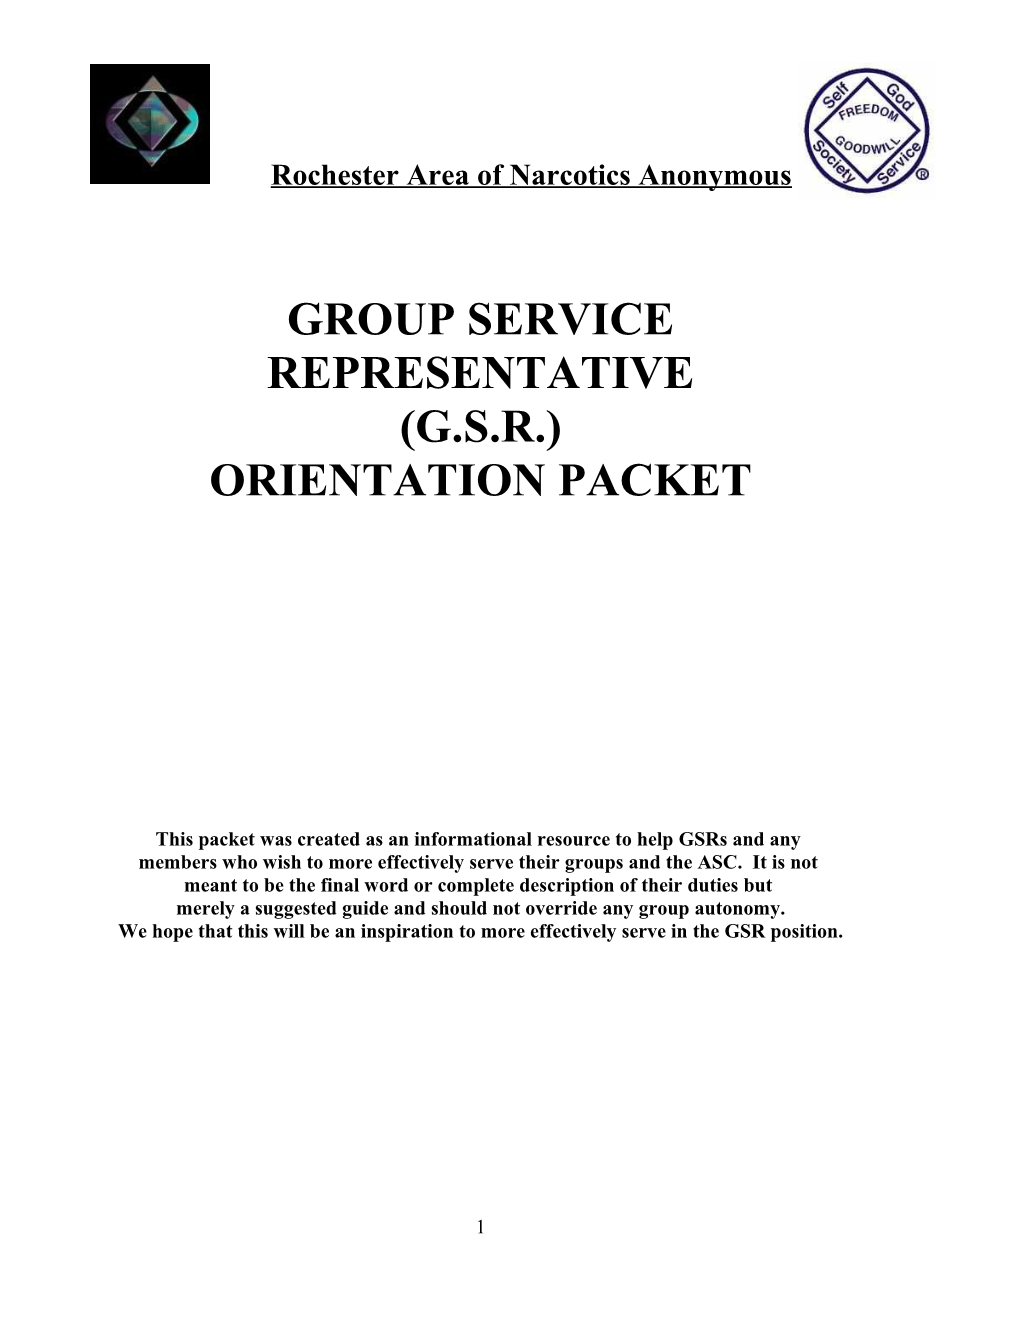 This Packet Was Created As an Informational Resource to Help Gsrs and Any